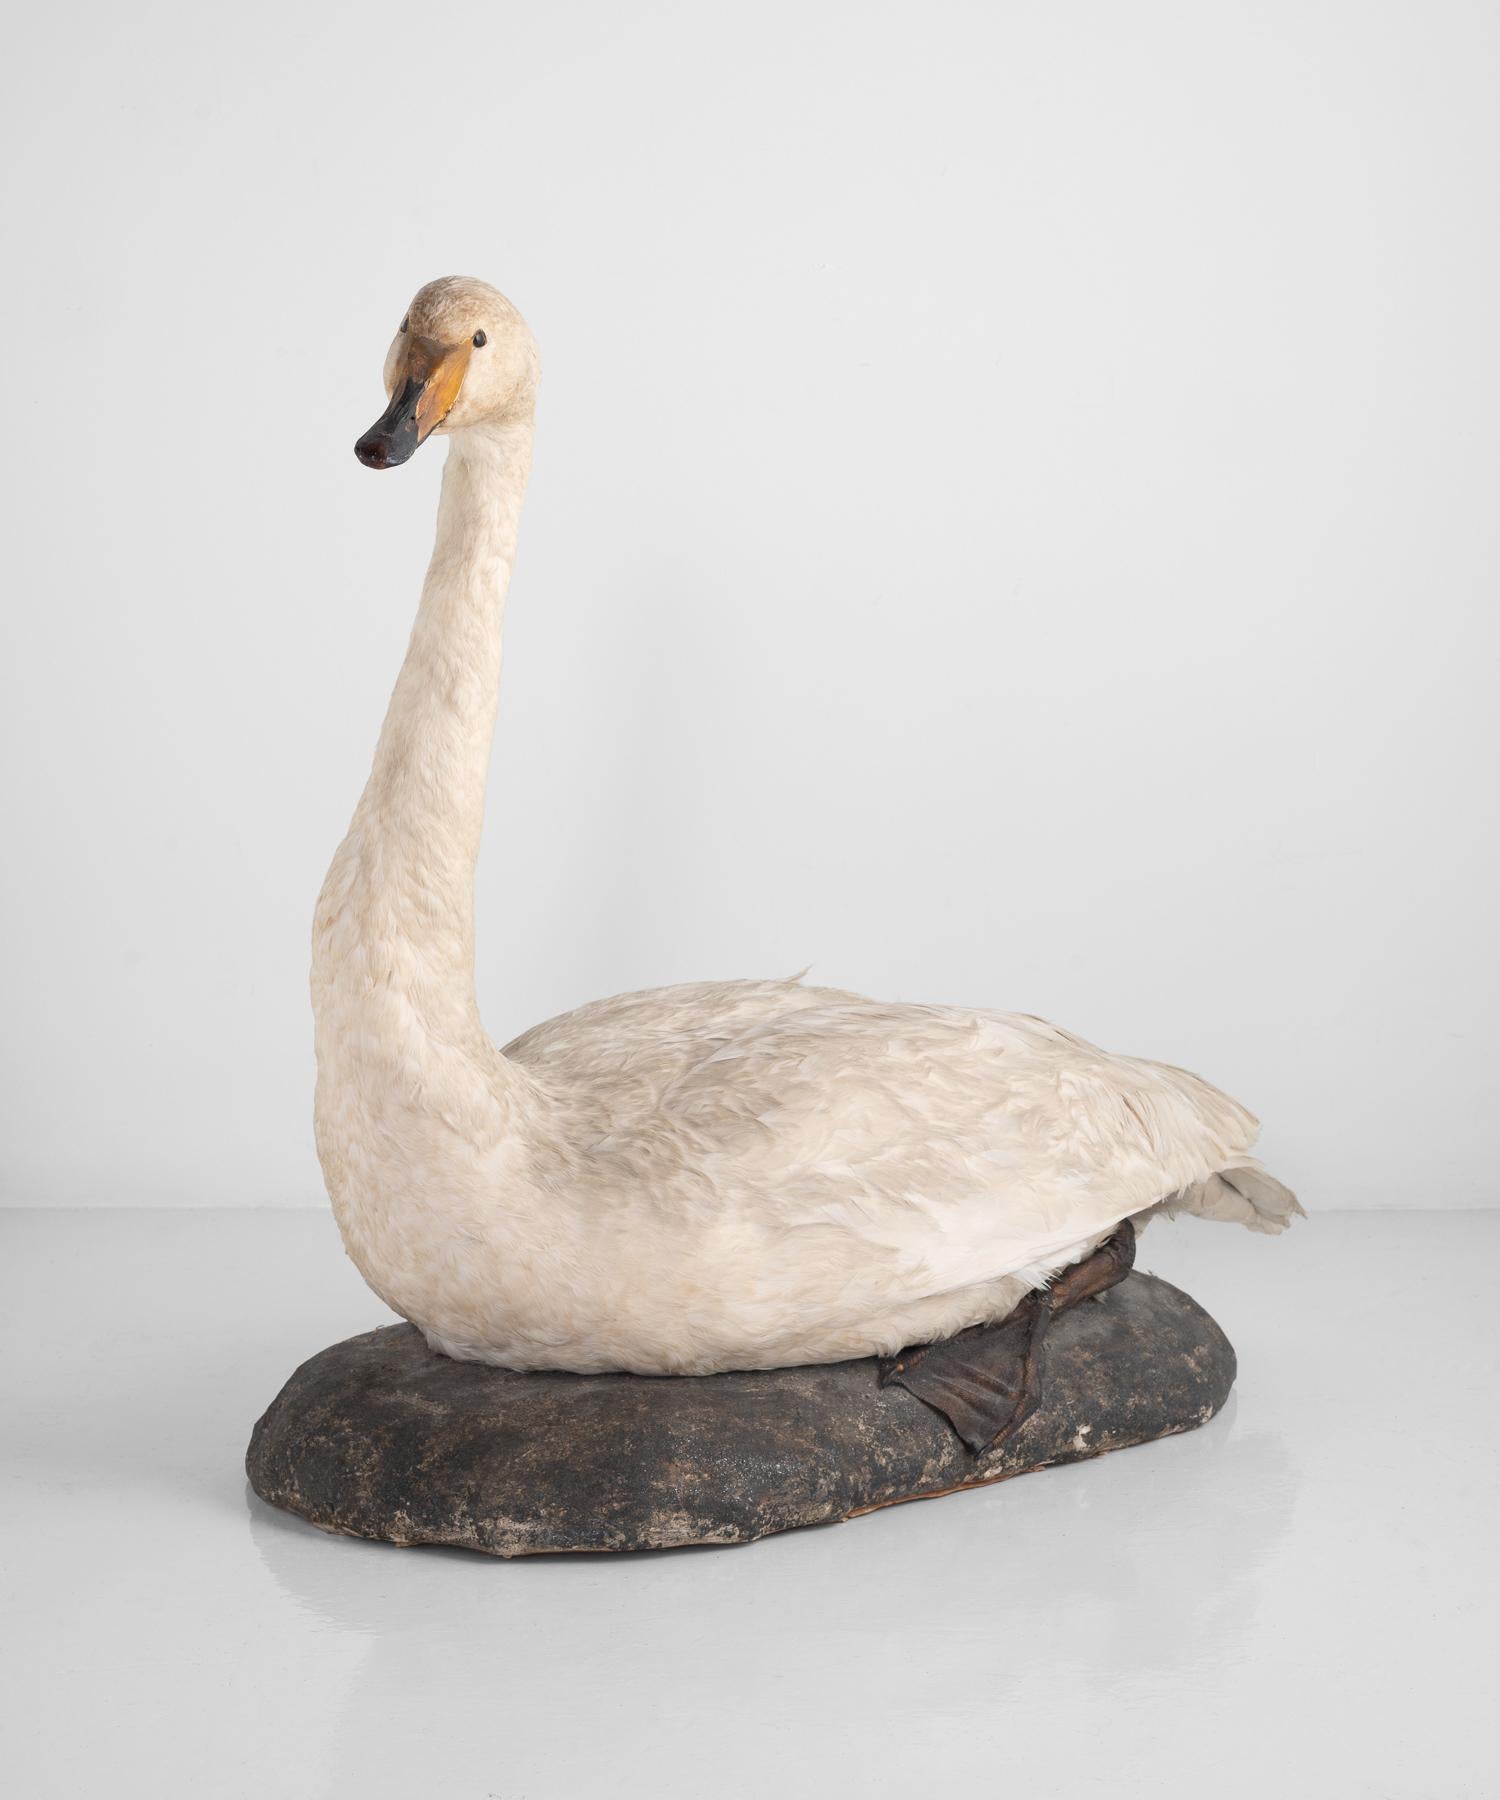 Taxidermy mute swan, England, circa 1930.

Sits at rest on a simple base.